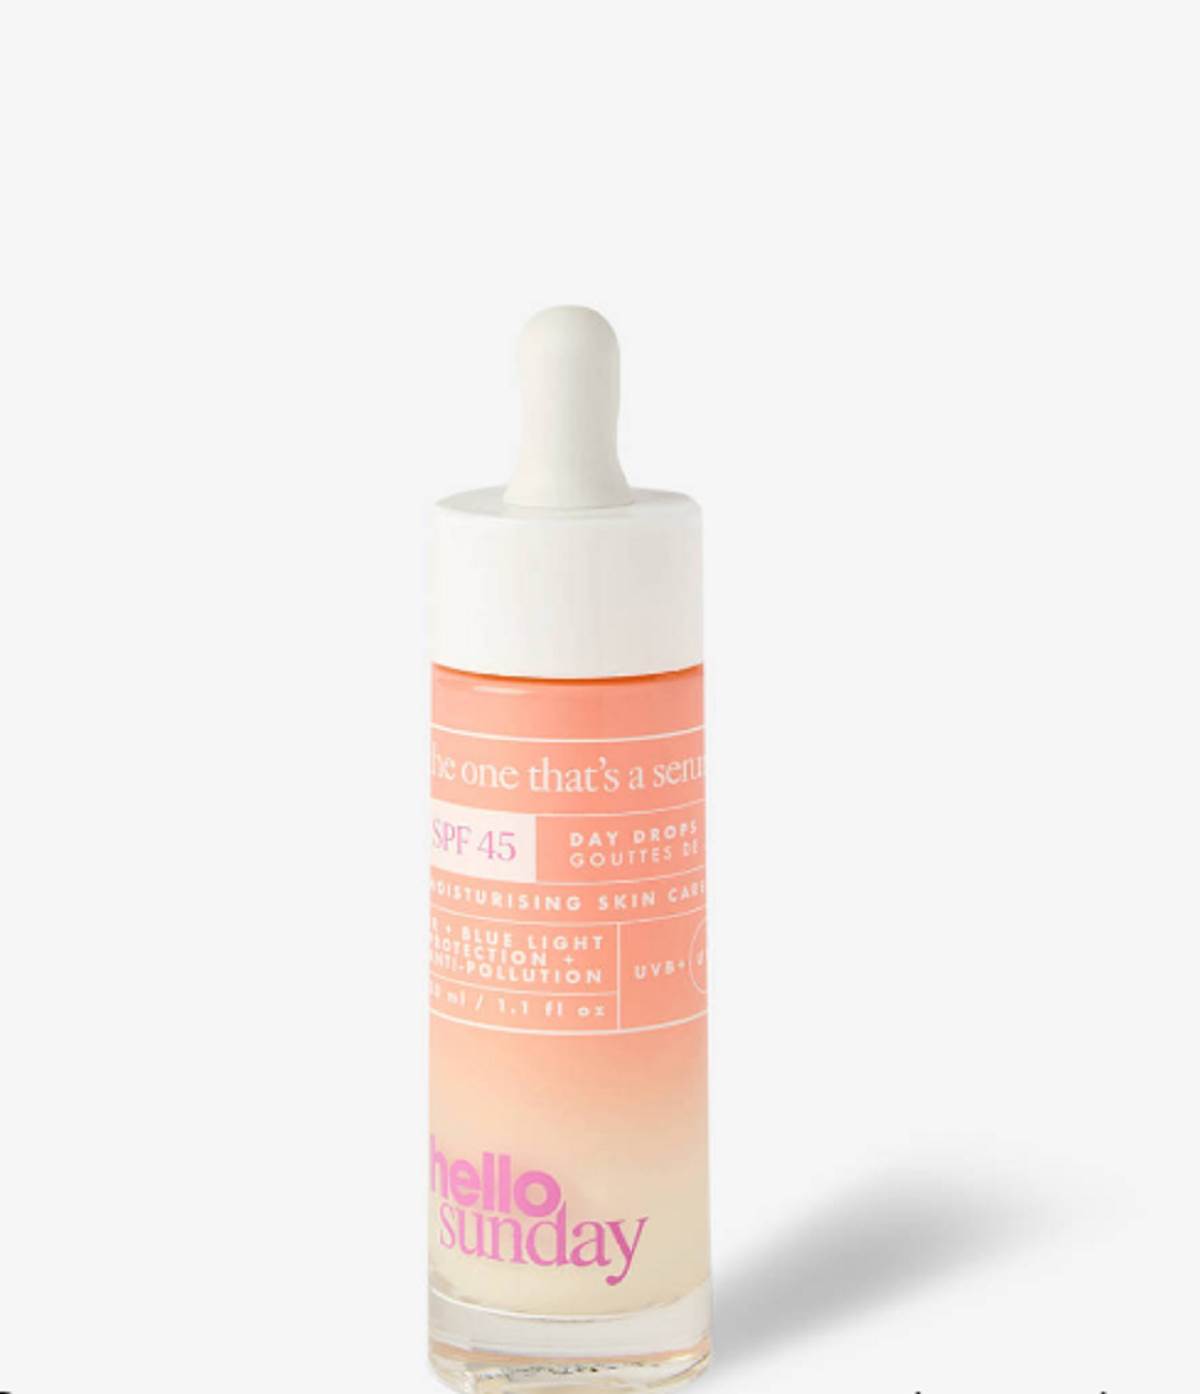  Hello Sunday The One That’s A Serum Face Drops SPF45. 